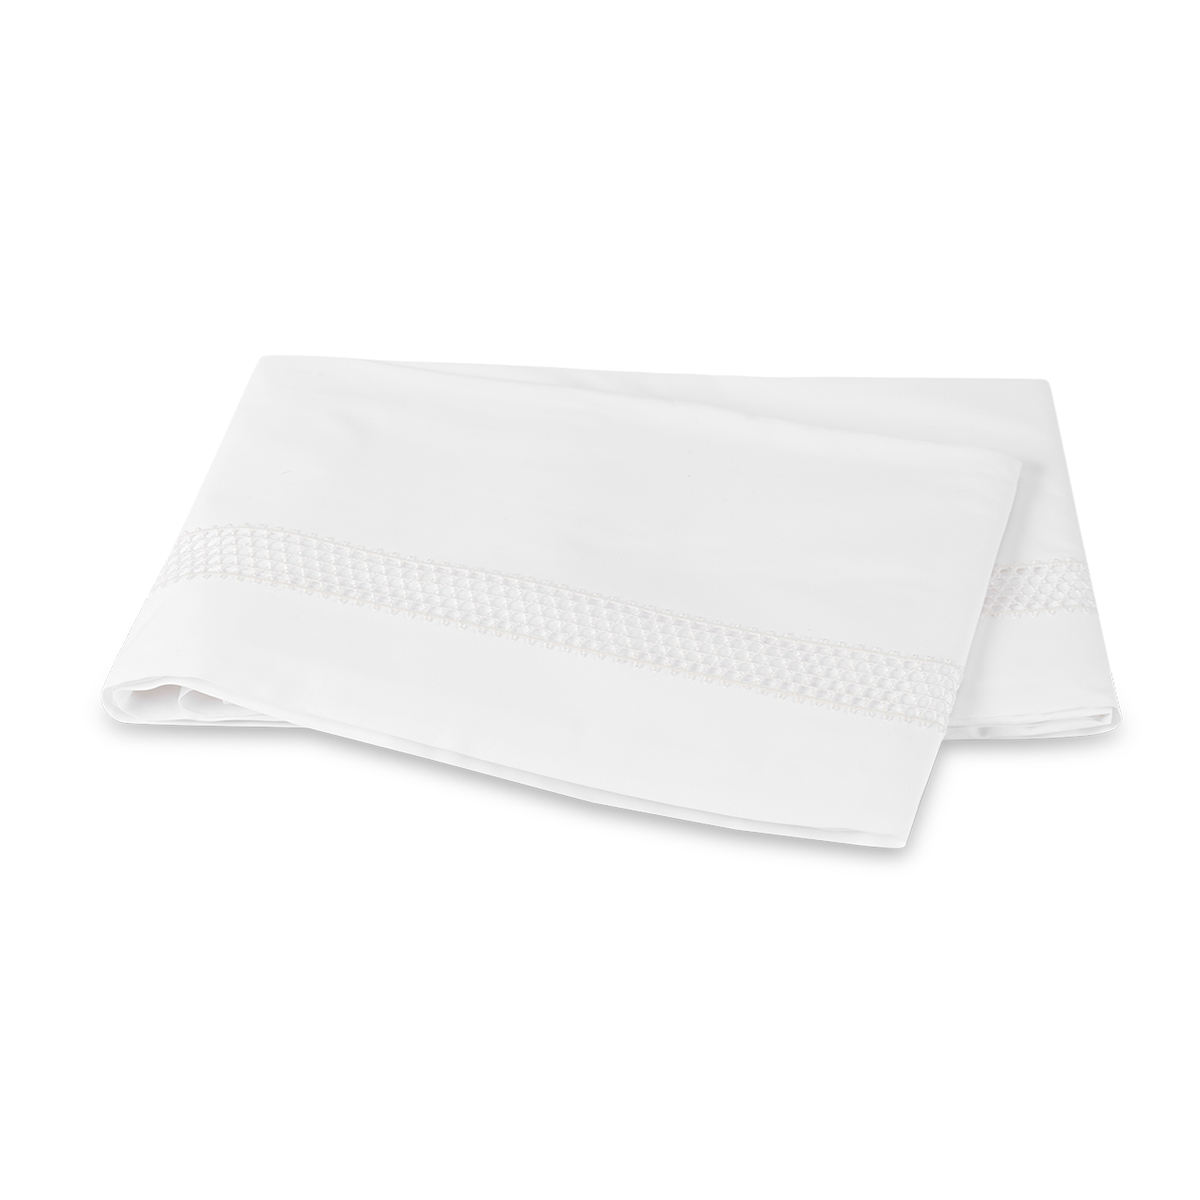 Clear Image of Matouk Cecily Flat Sheet in White Color